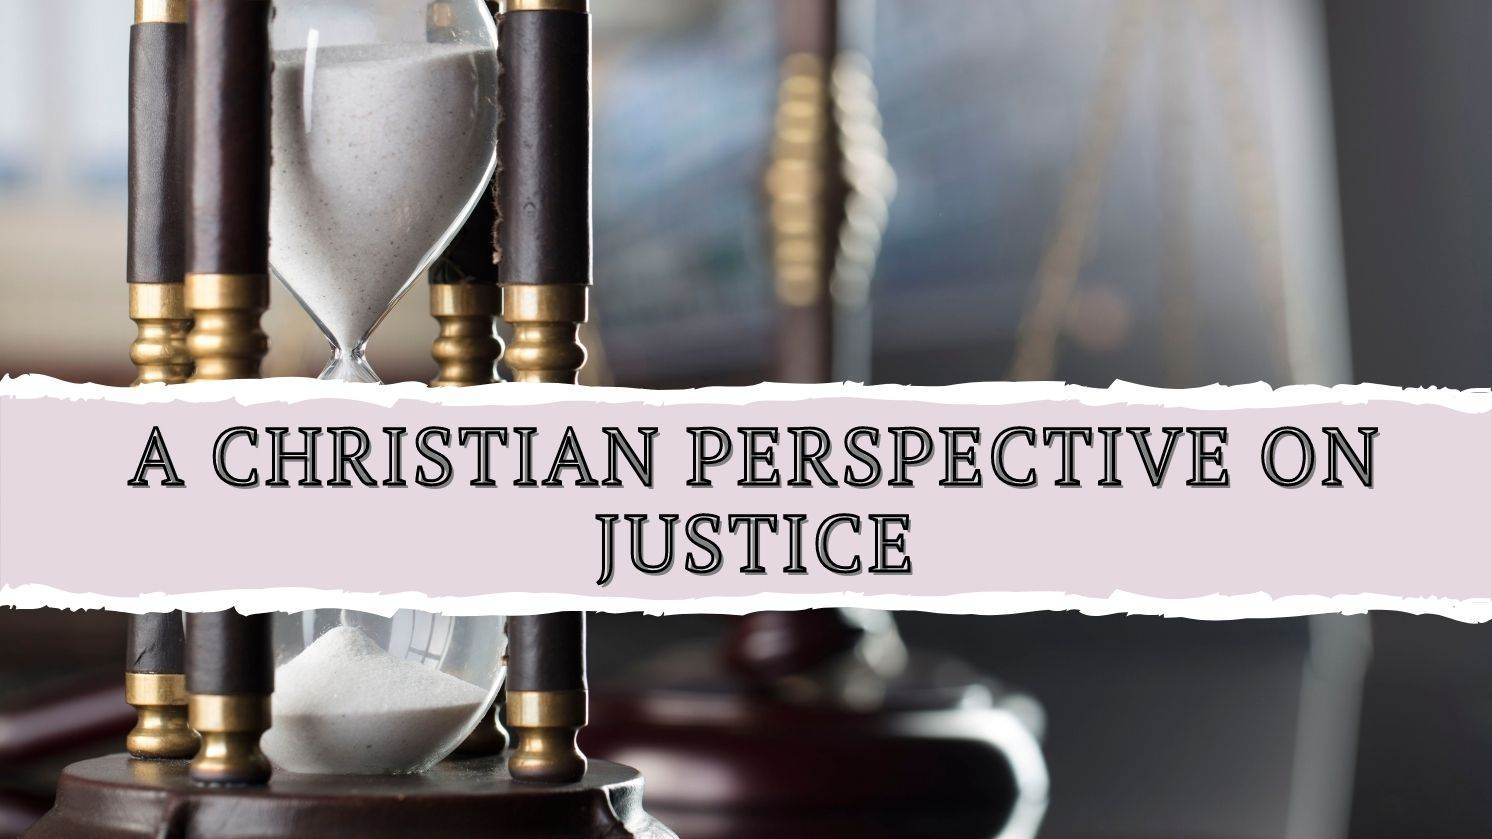 A Christian Perspective on Justice